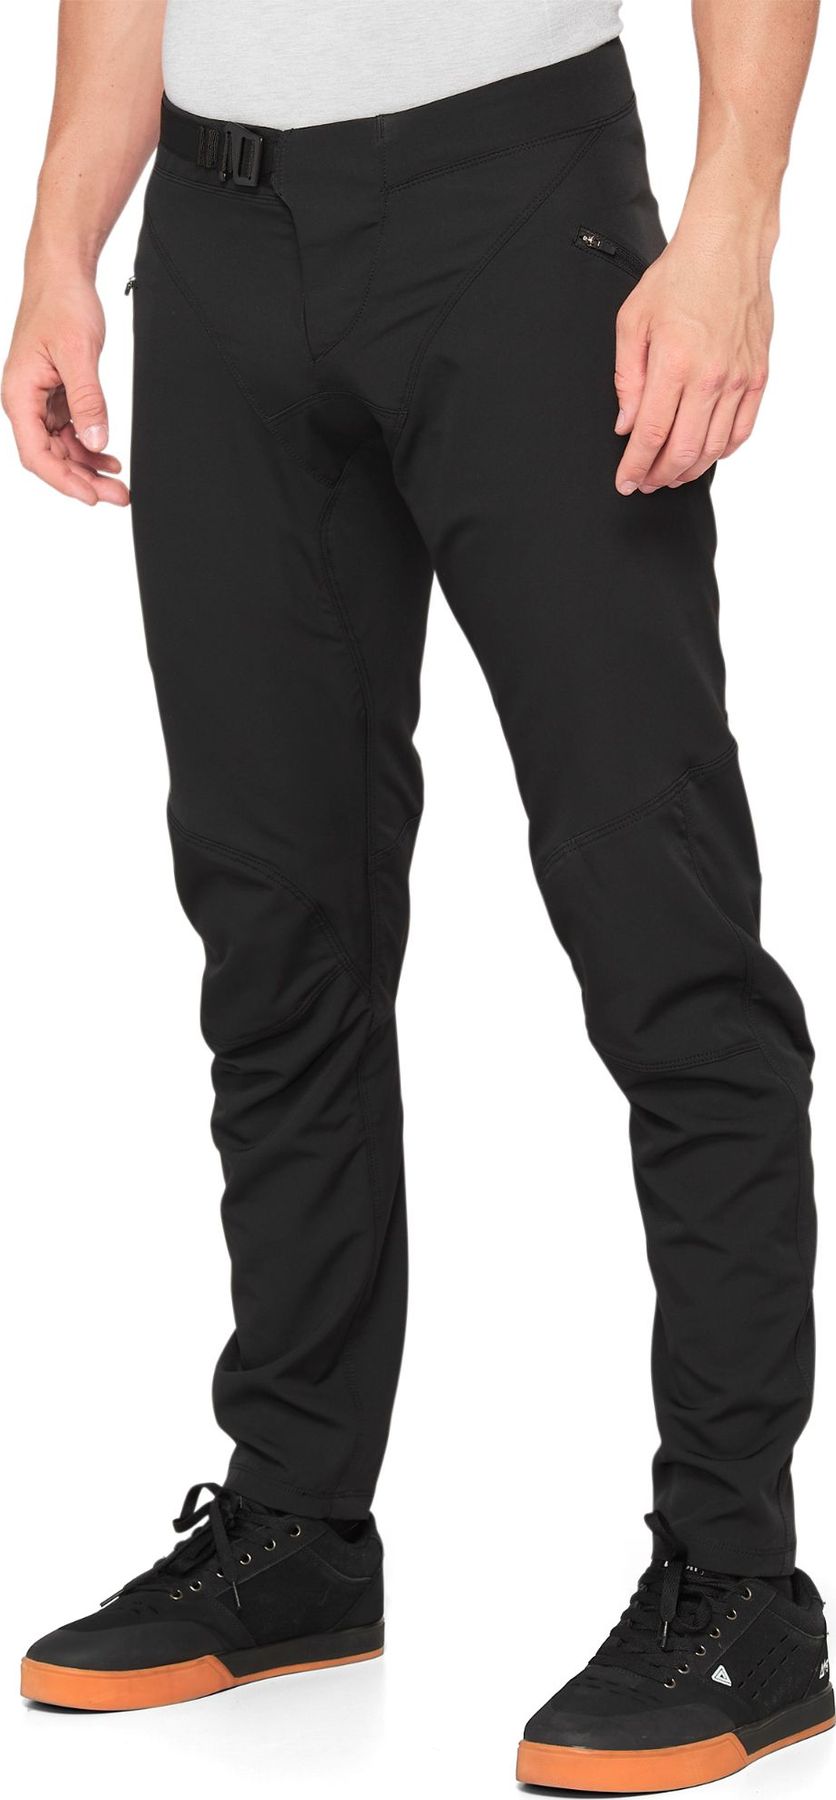 100% Airmatic Pants - Trousers & Tights - Cycle SuperStore